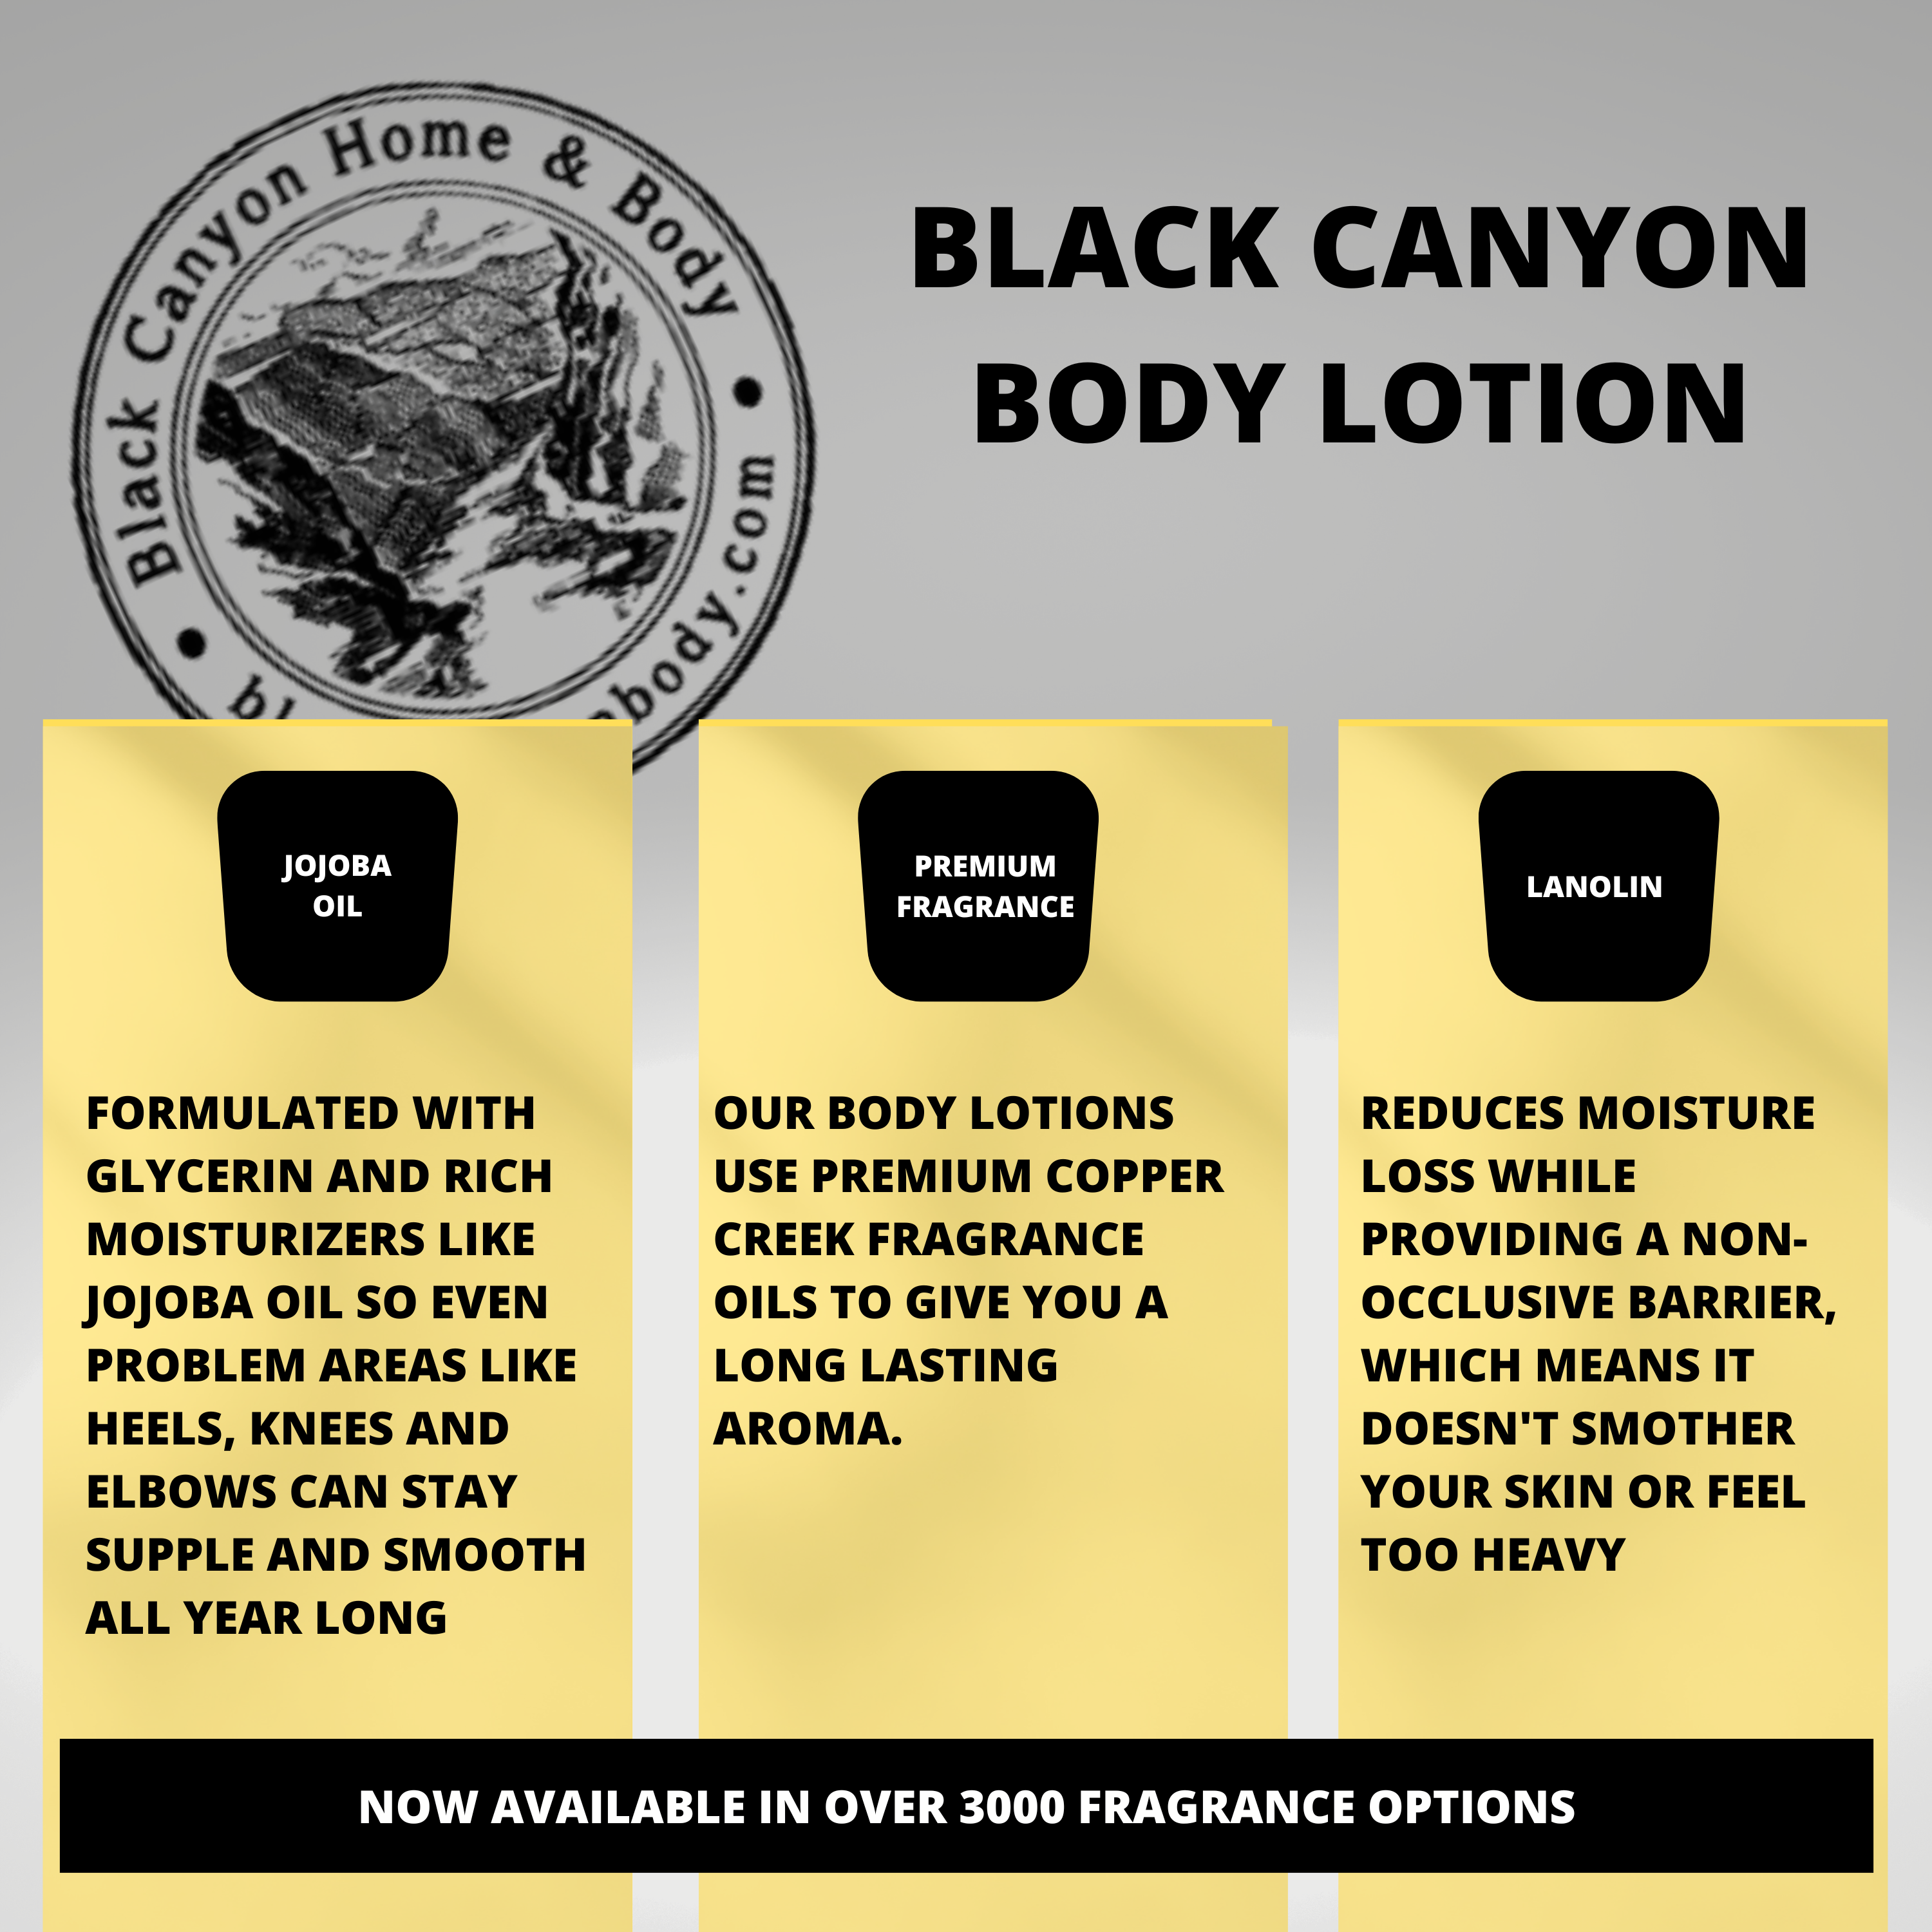 Black Canyon Autumn Breeze Scented Luxury Body Lotion with Lanolin and Jojoba Oil